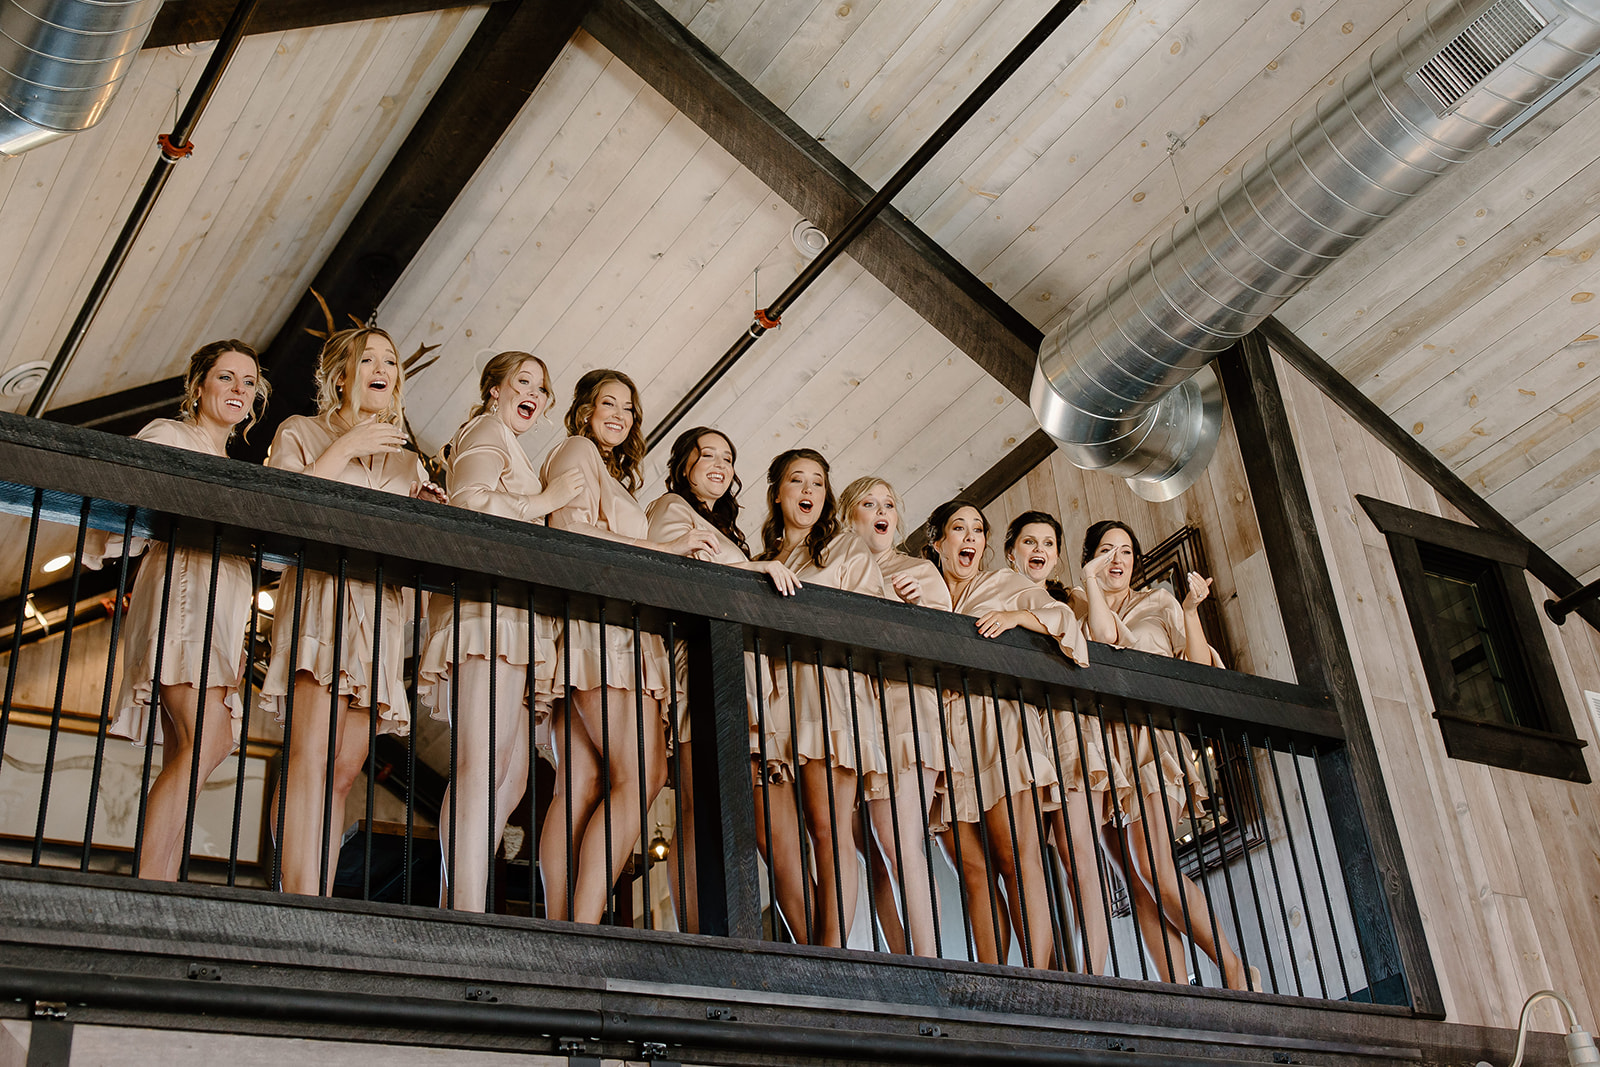 Bridesmaids on a balcony react to seeing their friend 